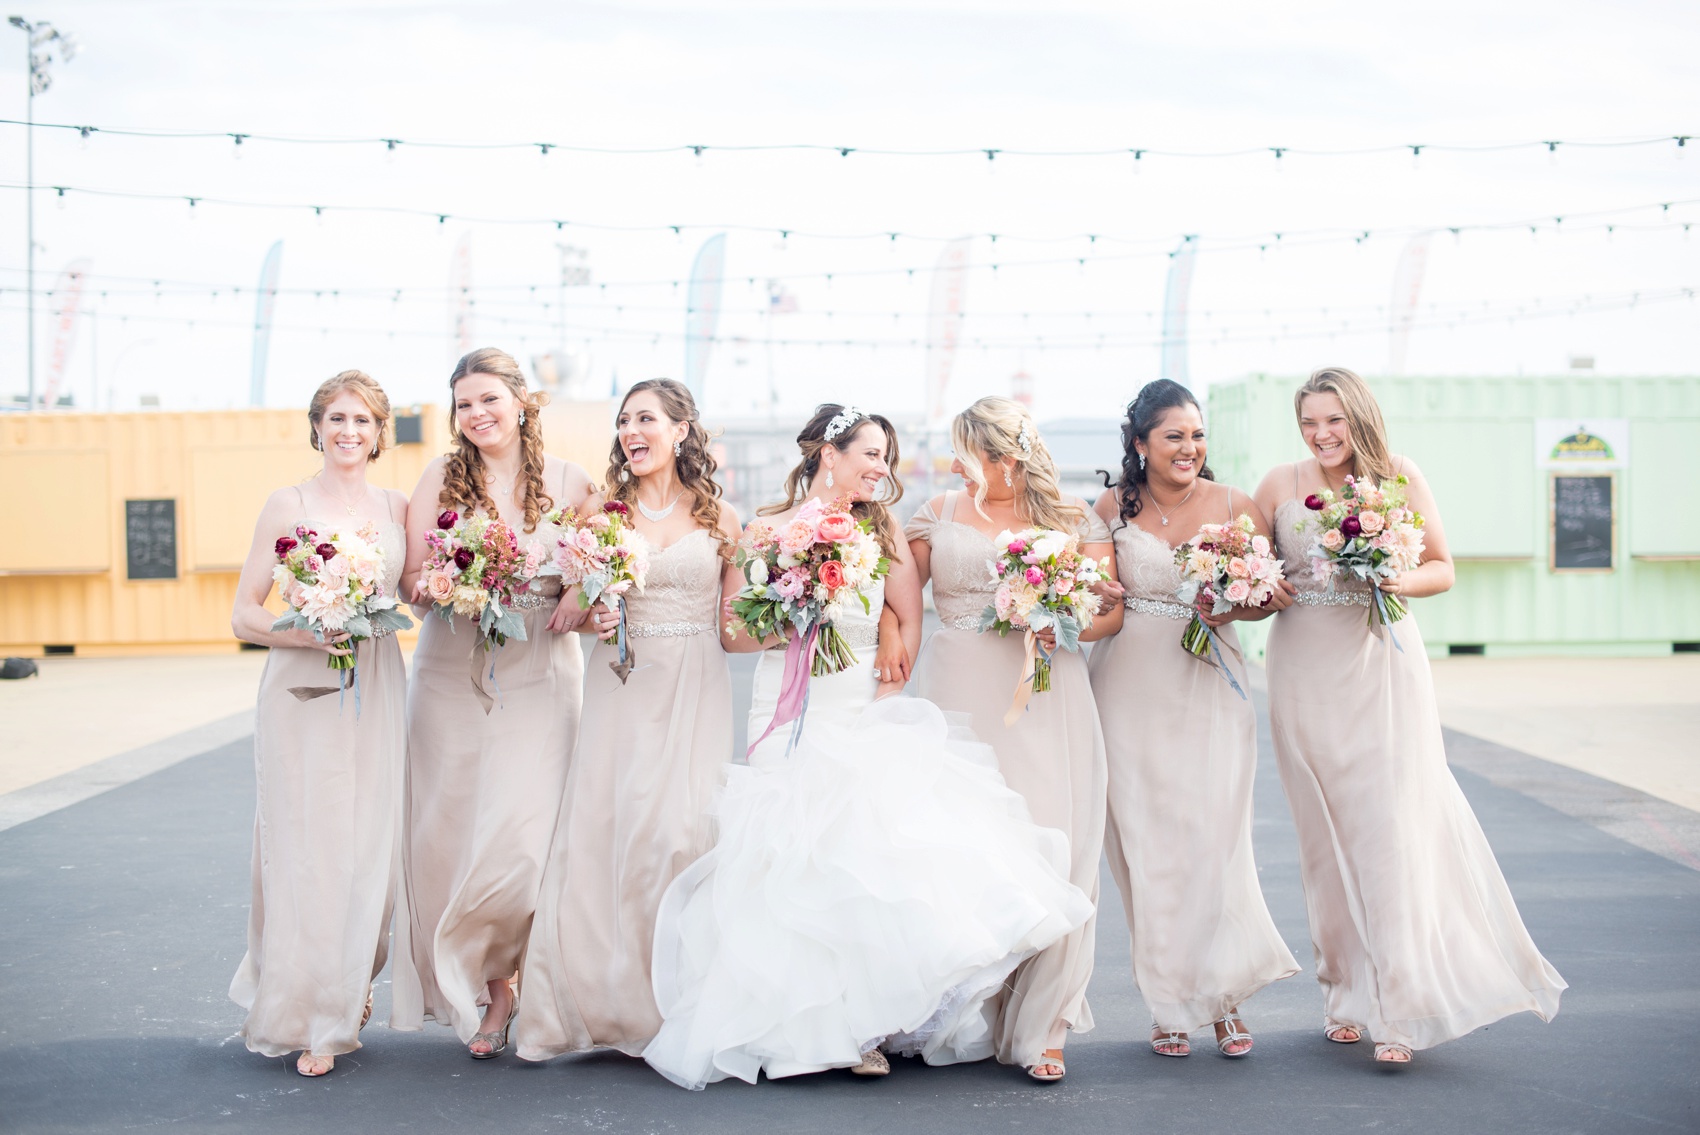 Coney Island colorful mural graffiti wedding bridal party photos by Mikkel Paige Photography, NYC wedding photographer. Planning by Dulce Dreams Events, flowers by Sachi Rose.